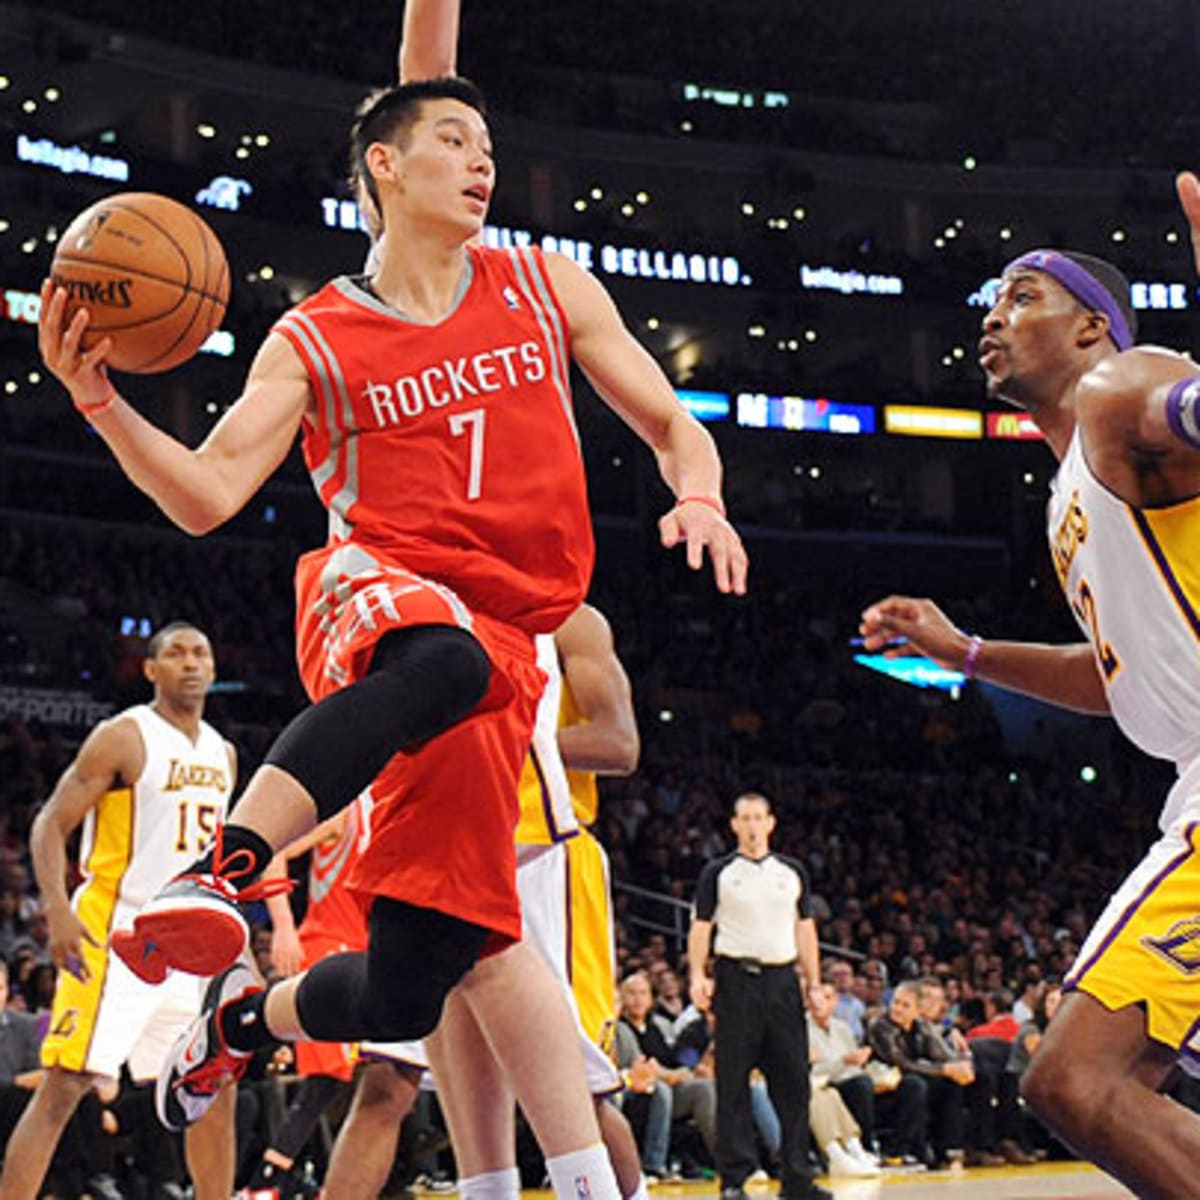 Jeremy Lin Debut With James Harden and Houston Rockets Well-Received